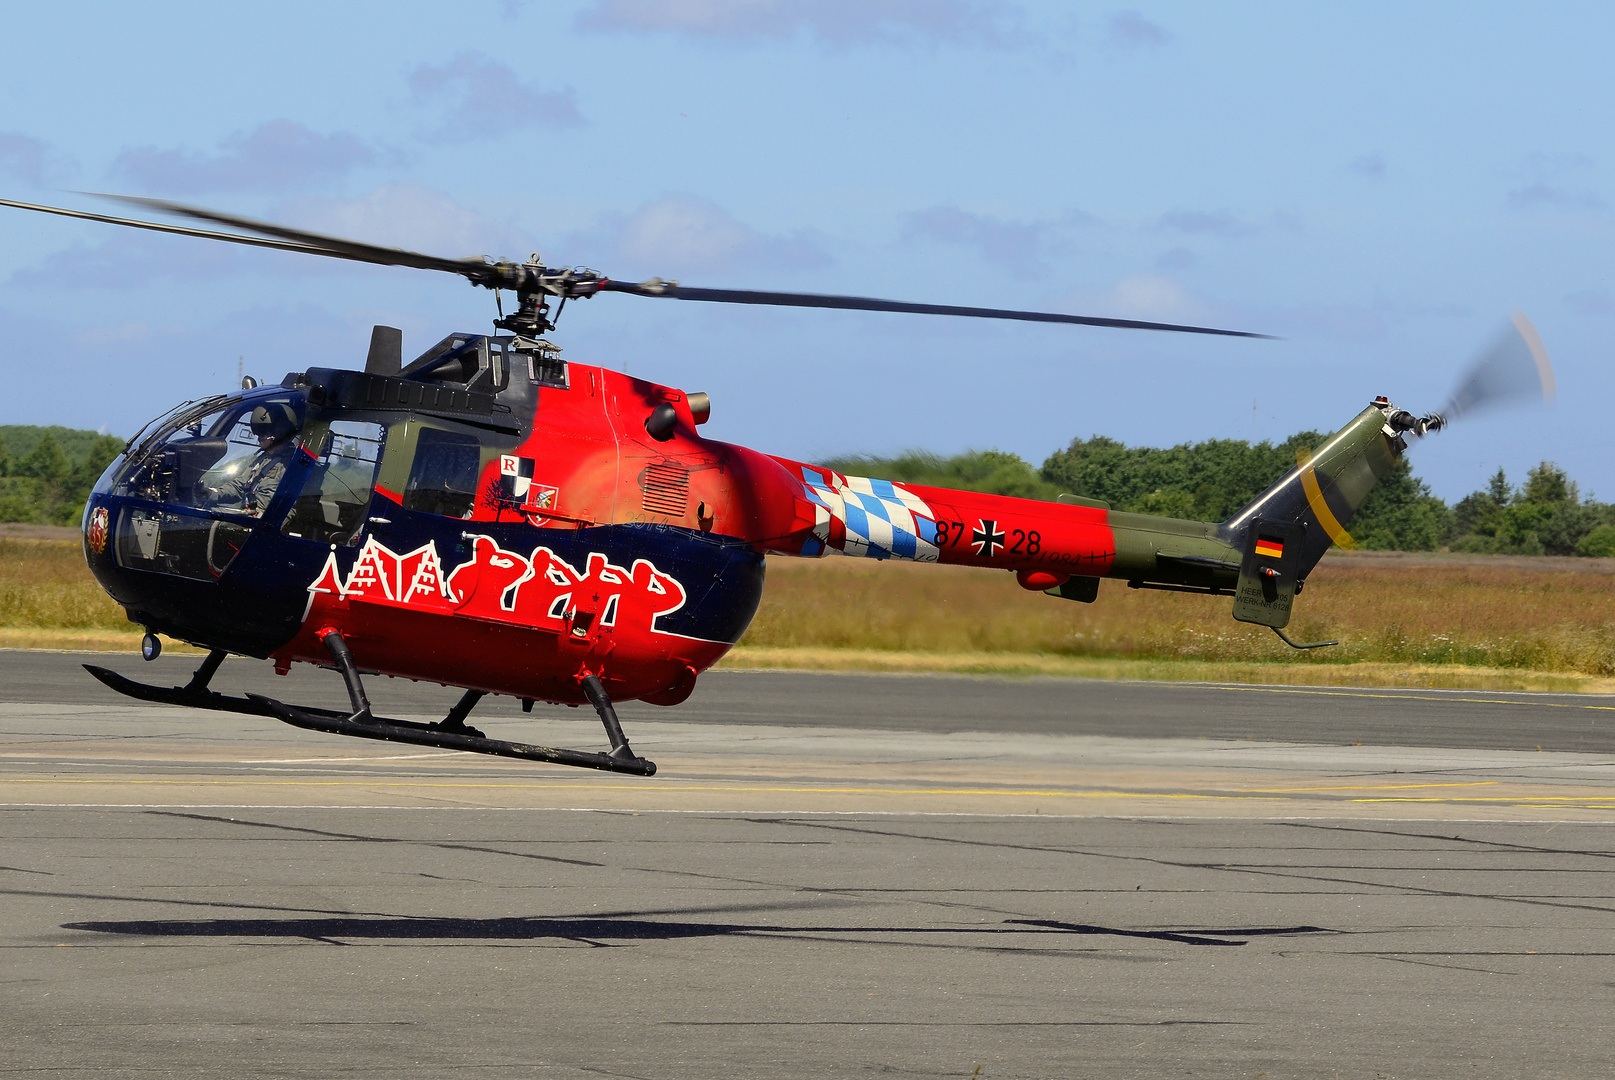 Bo-105, KHR-26, Fly Out Livery